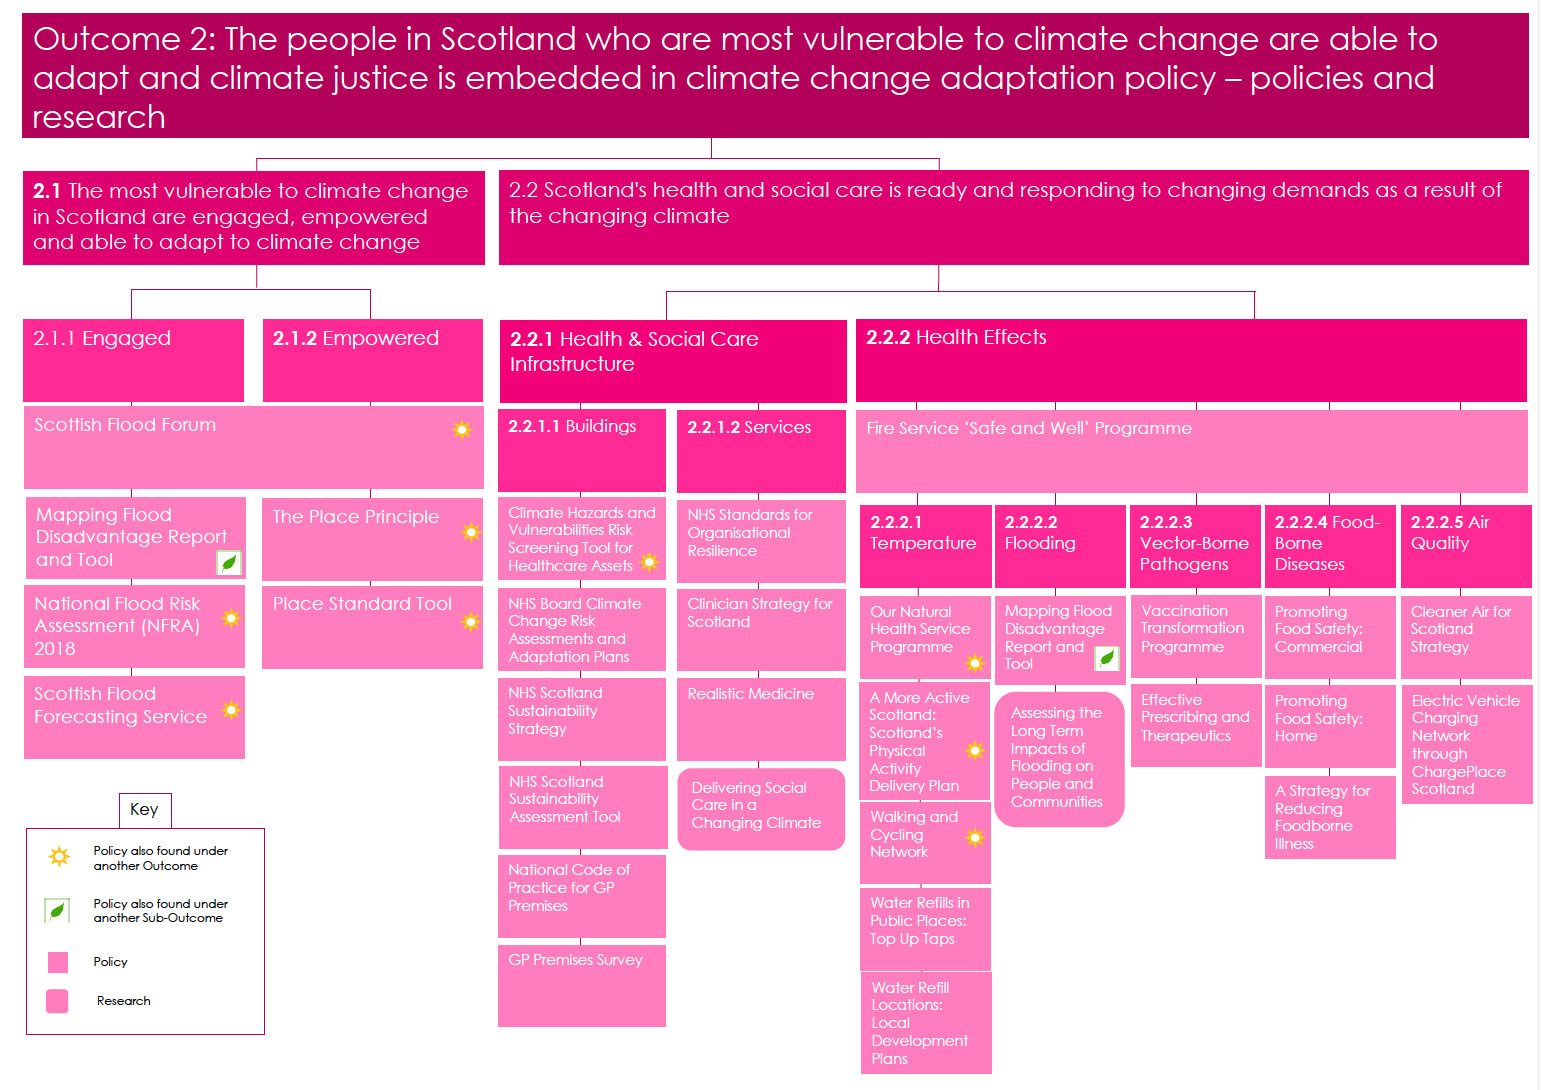 Outcome 2: The people in Scotland who are most vulnerable to climate change are able to adapt and climate justice is embedded in climate change adaptation policy – policies and research